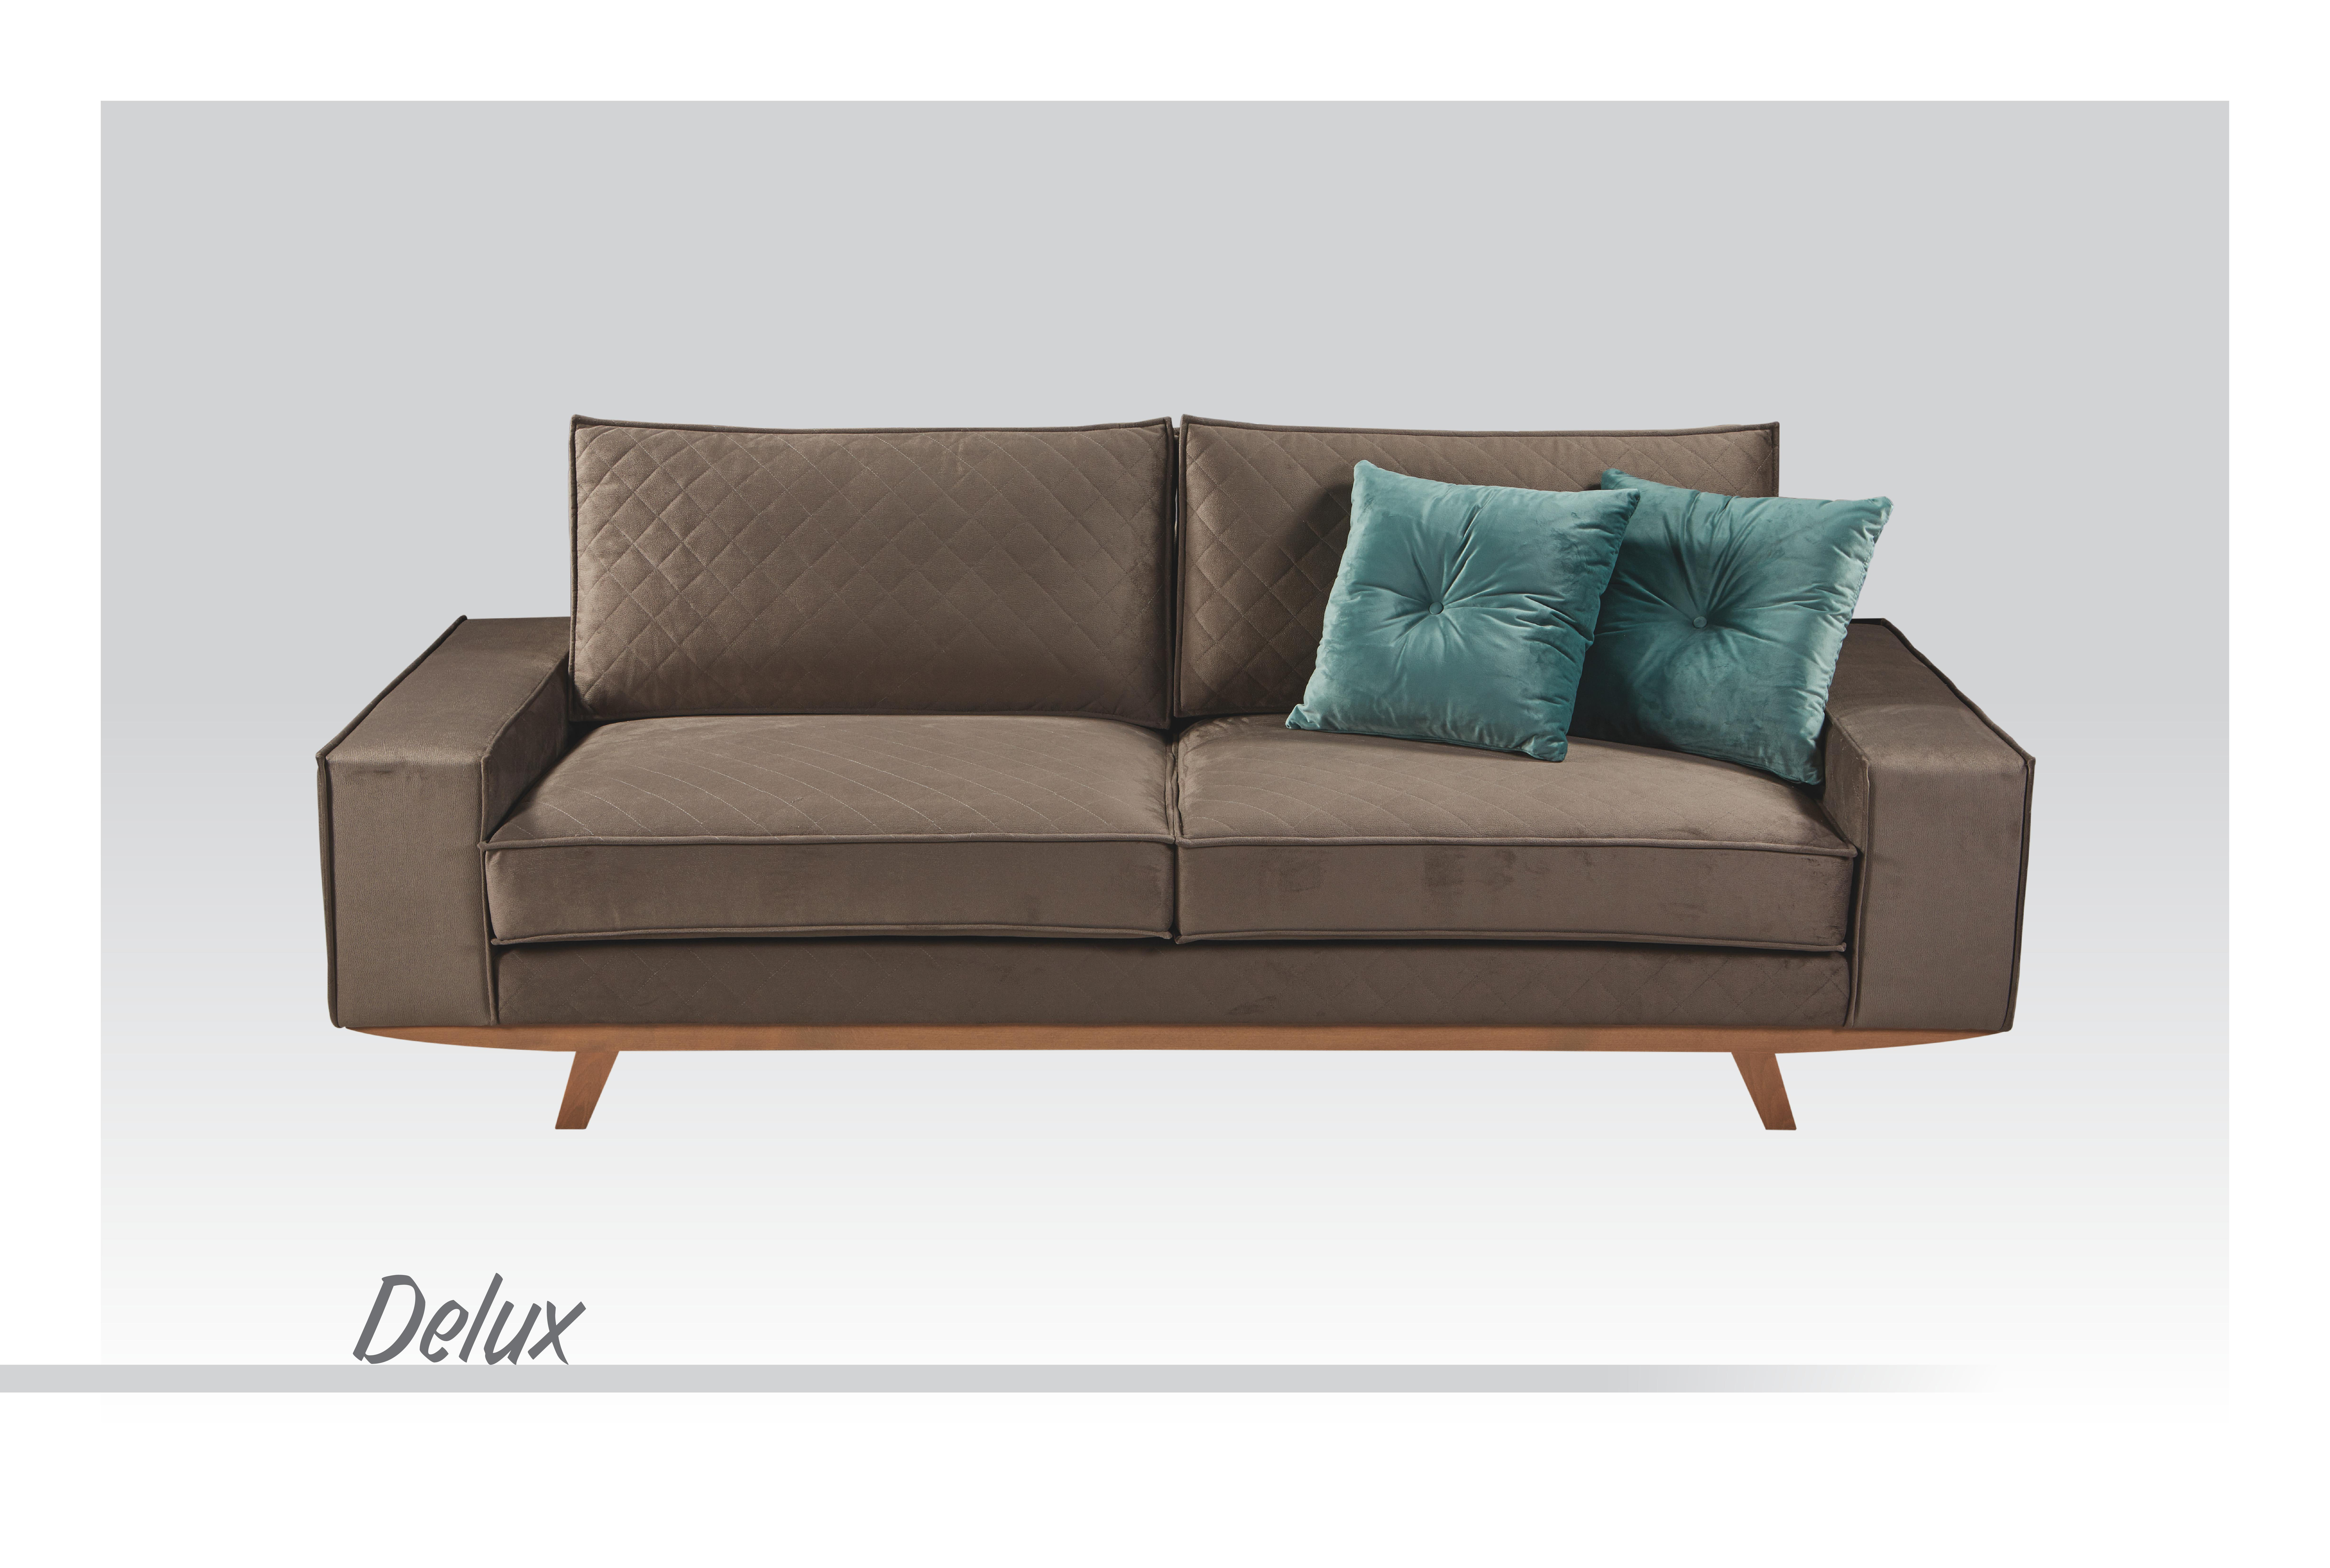 3-seated & 2-seated sofas "Deloux"